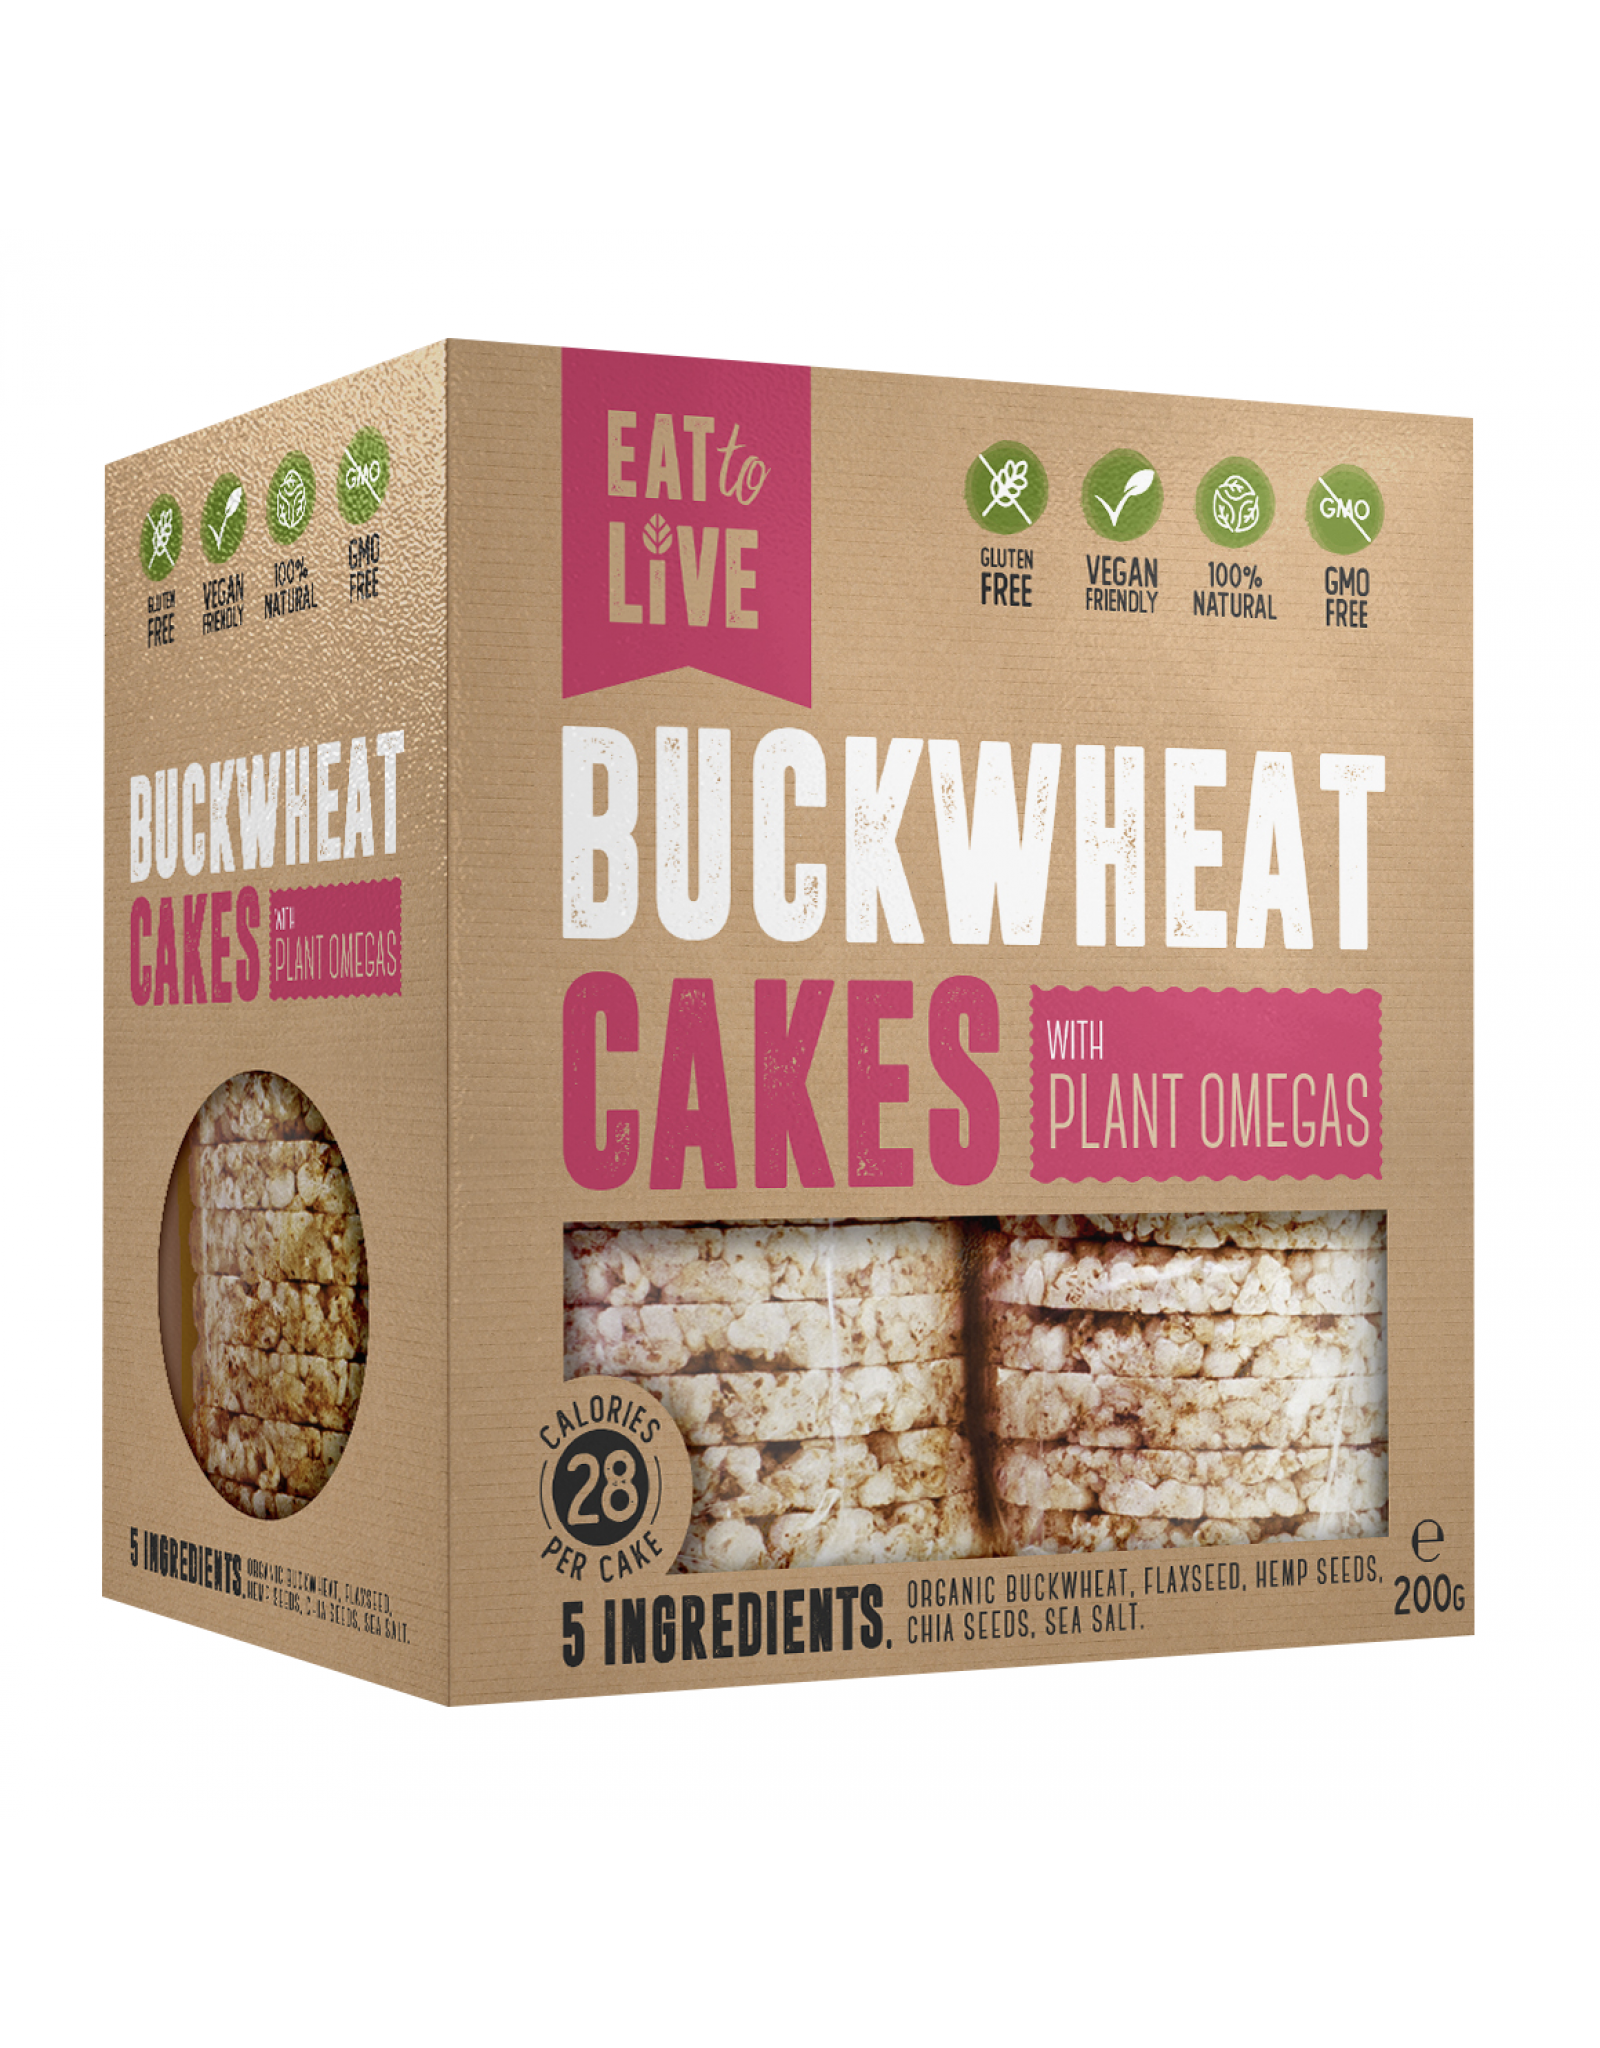 Eat to Live Buckwheat Cakes with Plant Omegas 200g